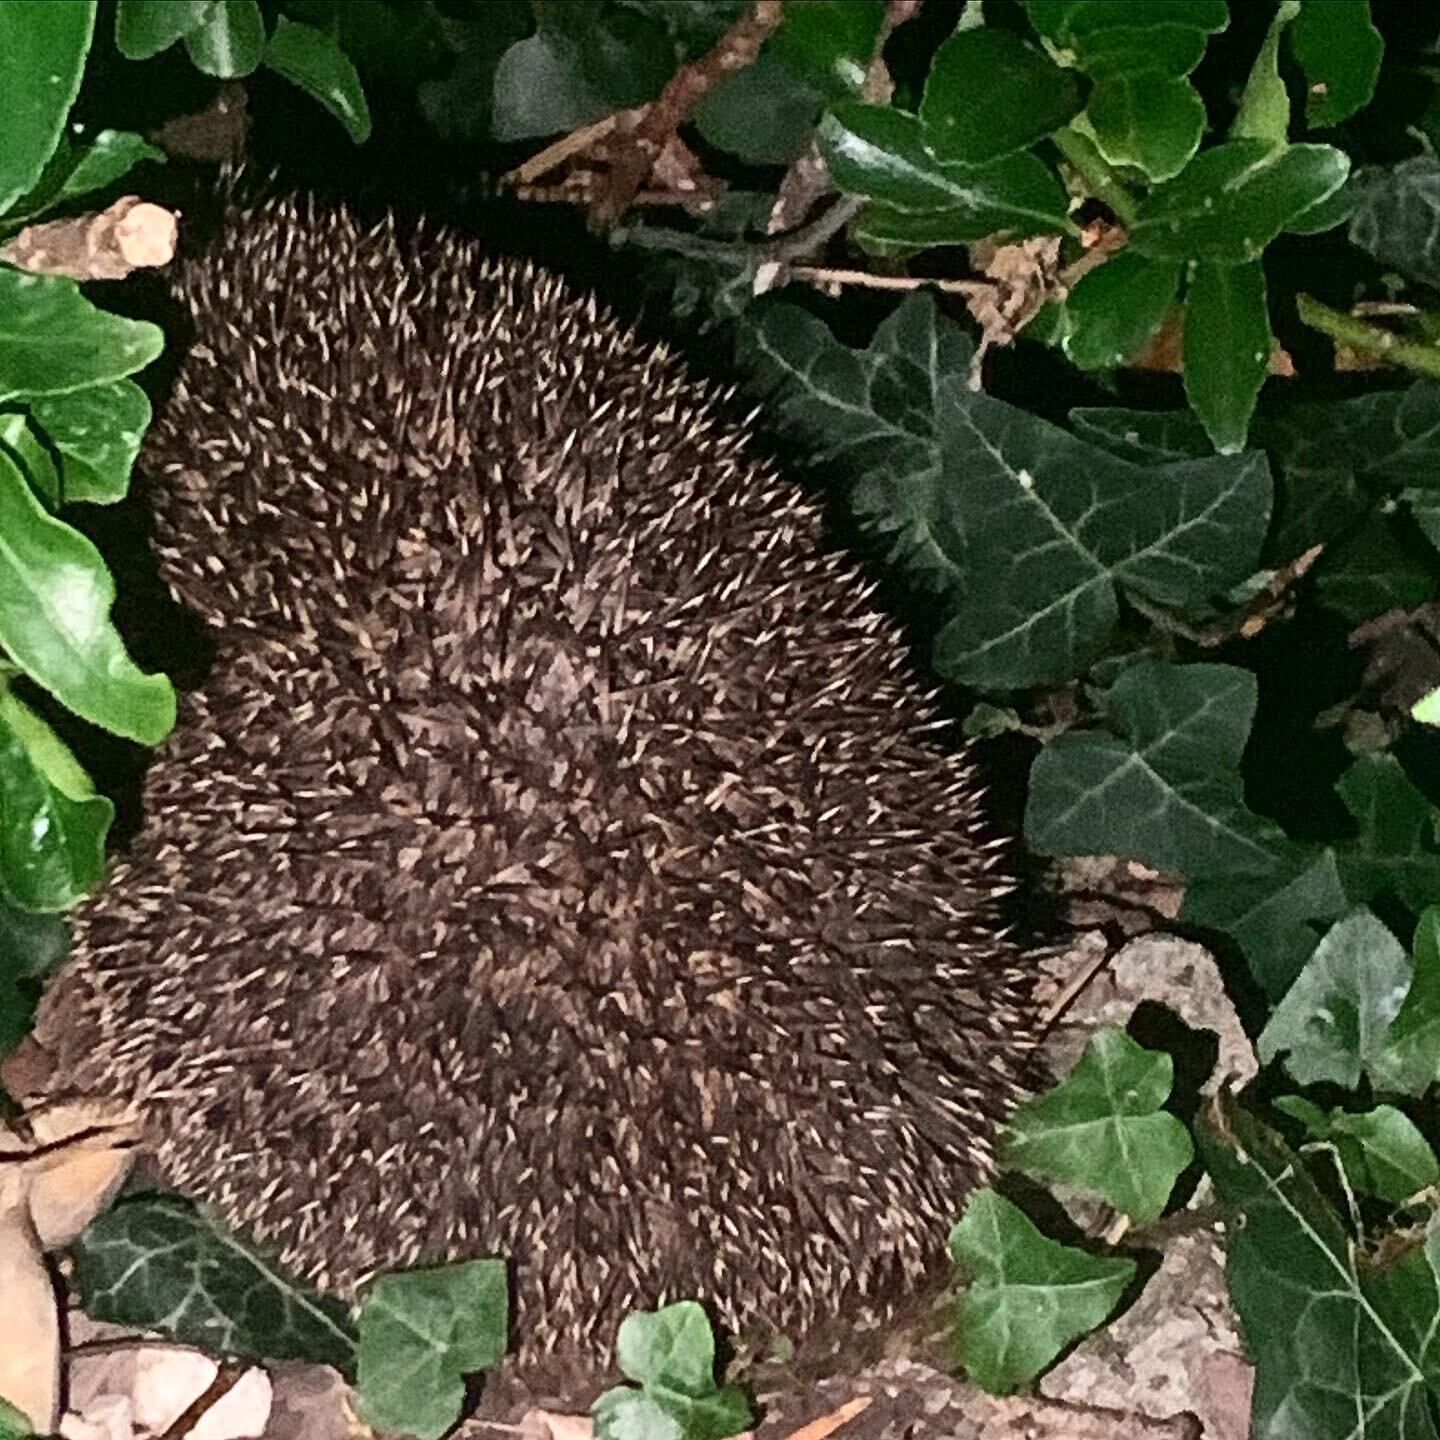 Not the best photo and definitely not my usual Monday post but&hellip;&hellip;.
WE HAVE A HEDGEHOG IN THE GARDEN!!
Yes I cried. Not just a bit either-deep sobs of joy.
Build it and they will come!!
.
.
.
#hedgehog #hedgepig #inmygarden #fromthegarden